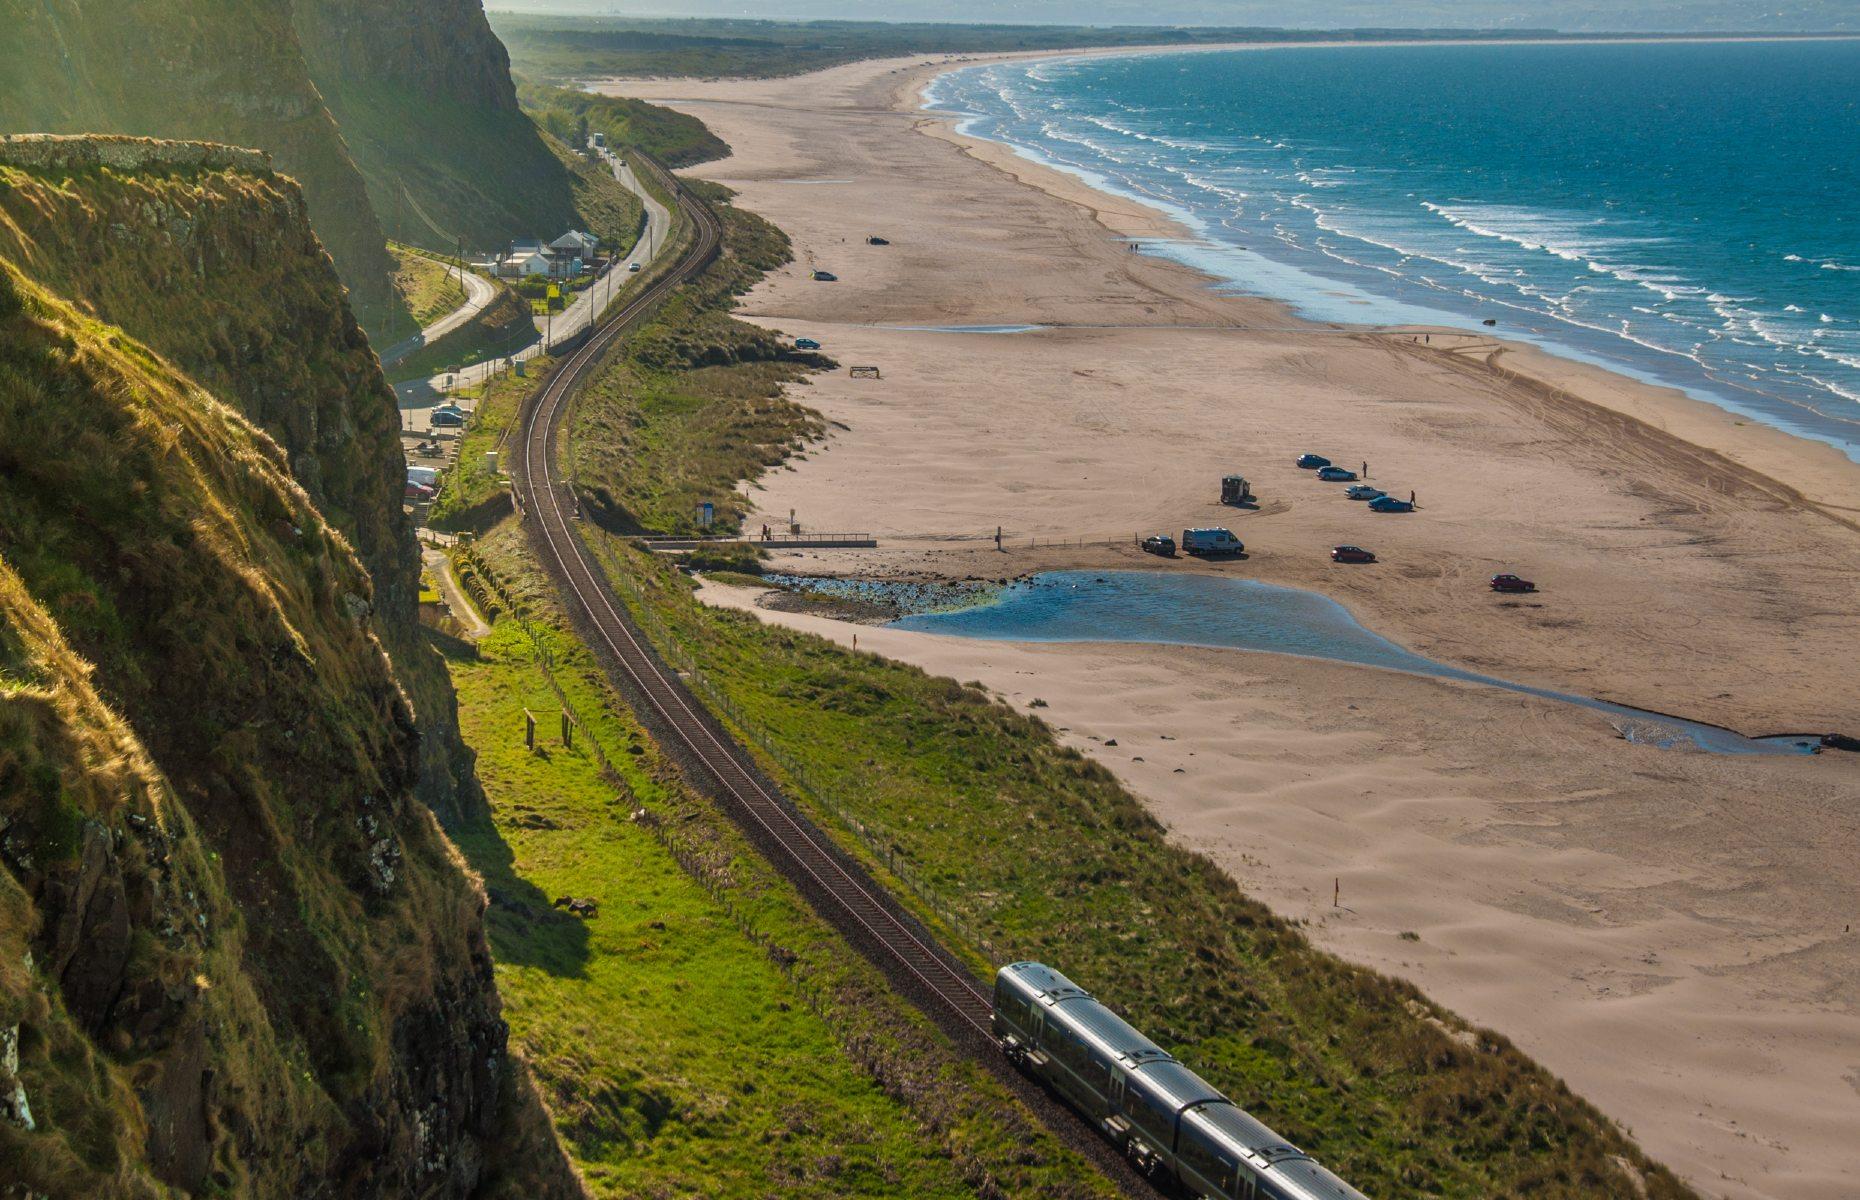 <p>Winding through some of Northern Ireland’s most picturesque spots, we can see why actor and explorer Michael Palin described this short train ride as <a href="https://www.belfasttelegraph.co.uk/news/northern-ireland/michael-palins-favourite-railway-line-between-coleraine-and-derry-in-northern-ireland-set-to-re-open-following-upgrade-35227689.html">“one of the most beautiful rail journeys in the world”</a>. Although just under an hour-long, the <a href="https://www.translink.co.uk/">29-mile (47km) railway</a> between Derry and Coleraine packs in plenty of stunning sights. Following the River Foyle, the route showcases breathtaking views of the golden sands of Benone Strand, colourful seaside villages and the magnificent Binevenagh Mountain.</p>